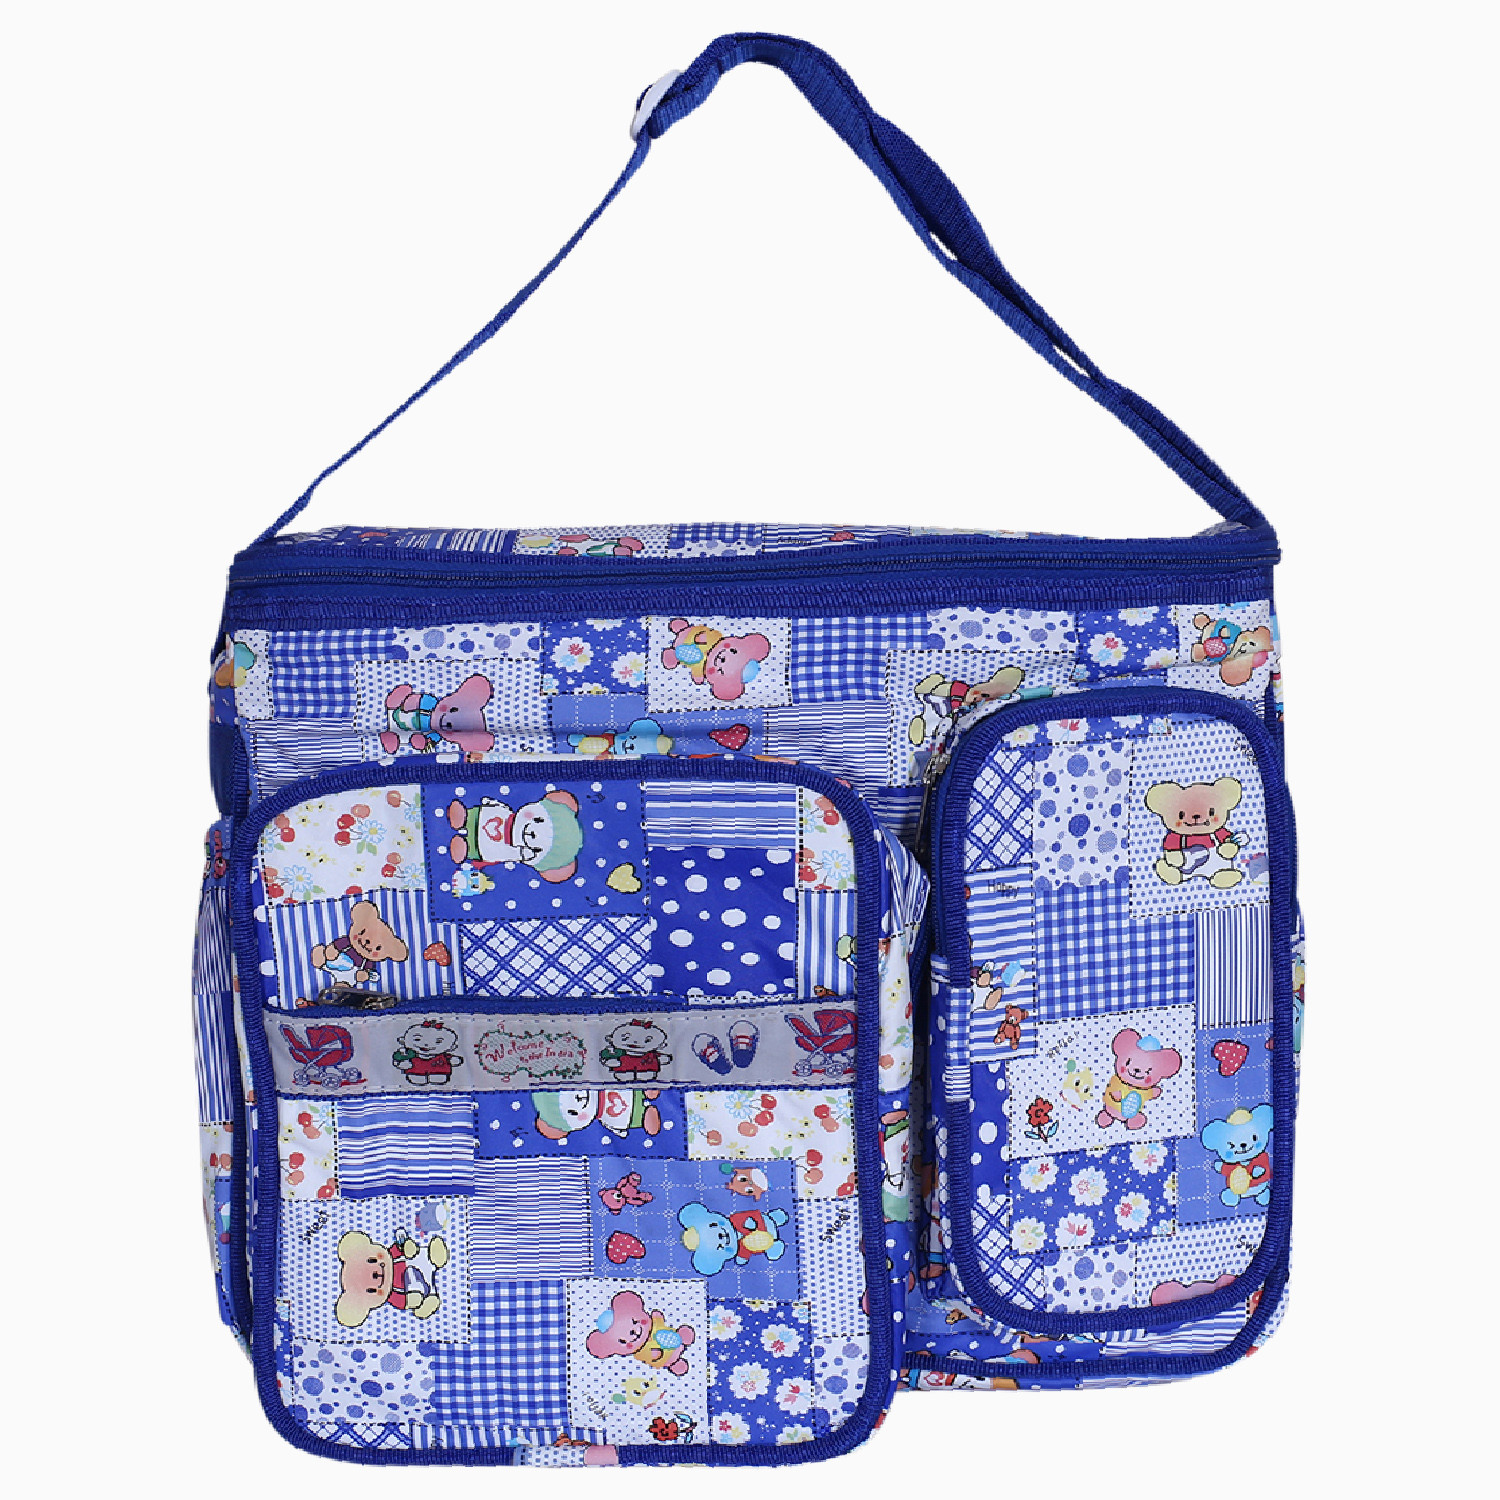 Kuber Industries PVC Multiuses Teddy Cartoon Print Mothers Bag/Diapers Bag With Handle For Traveling, storing (Blue)